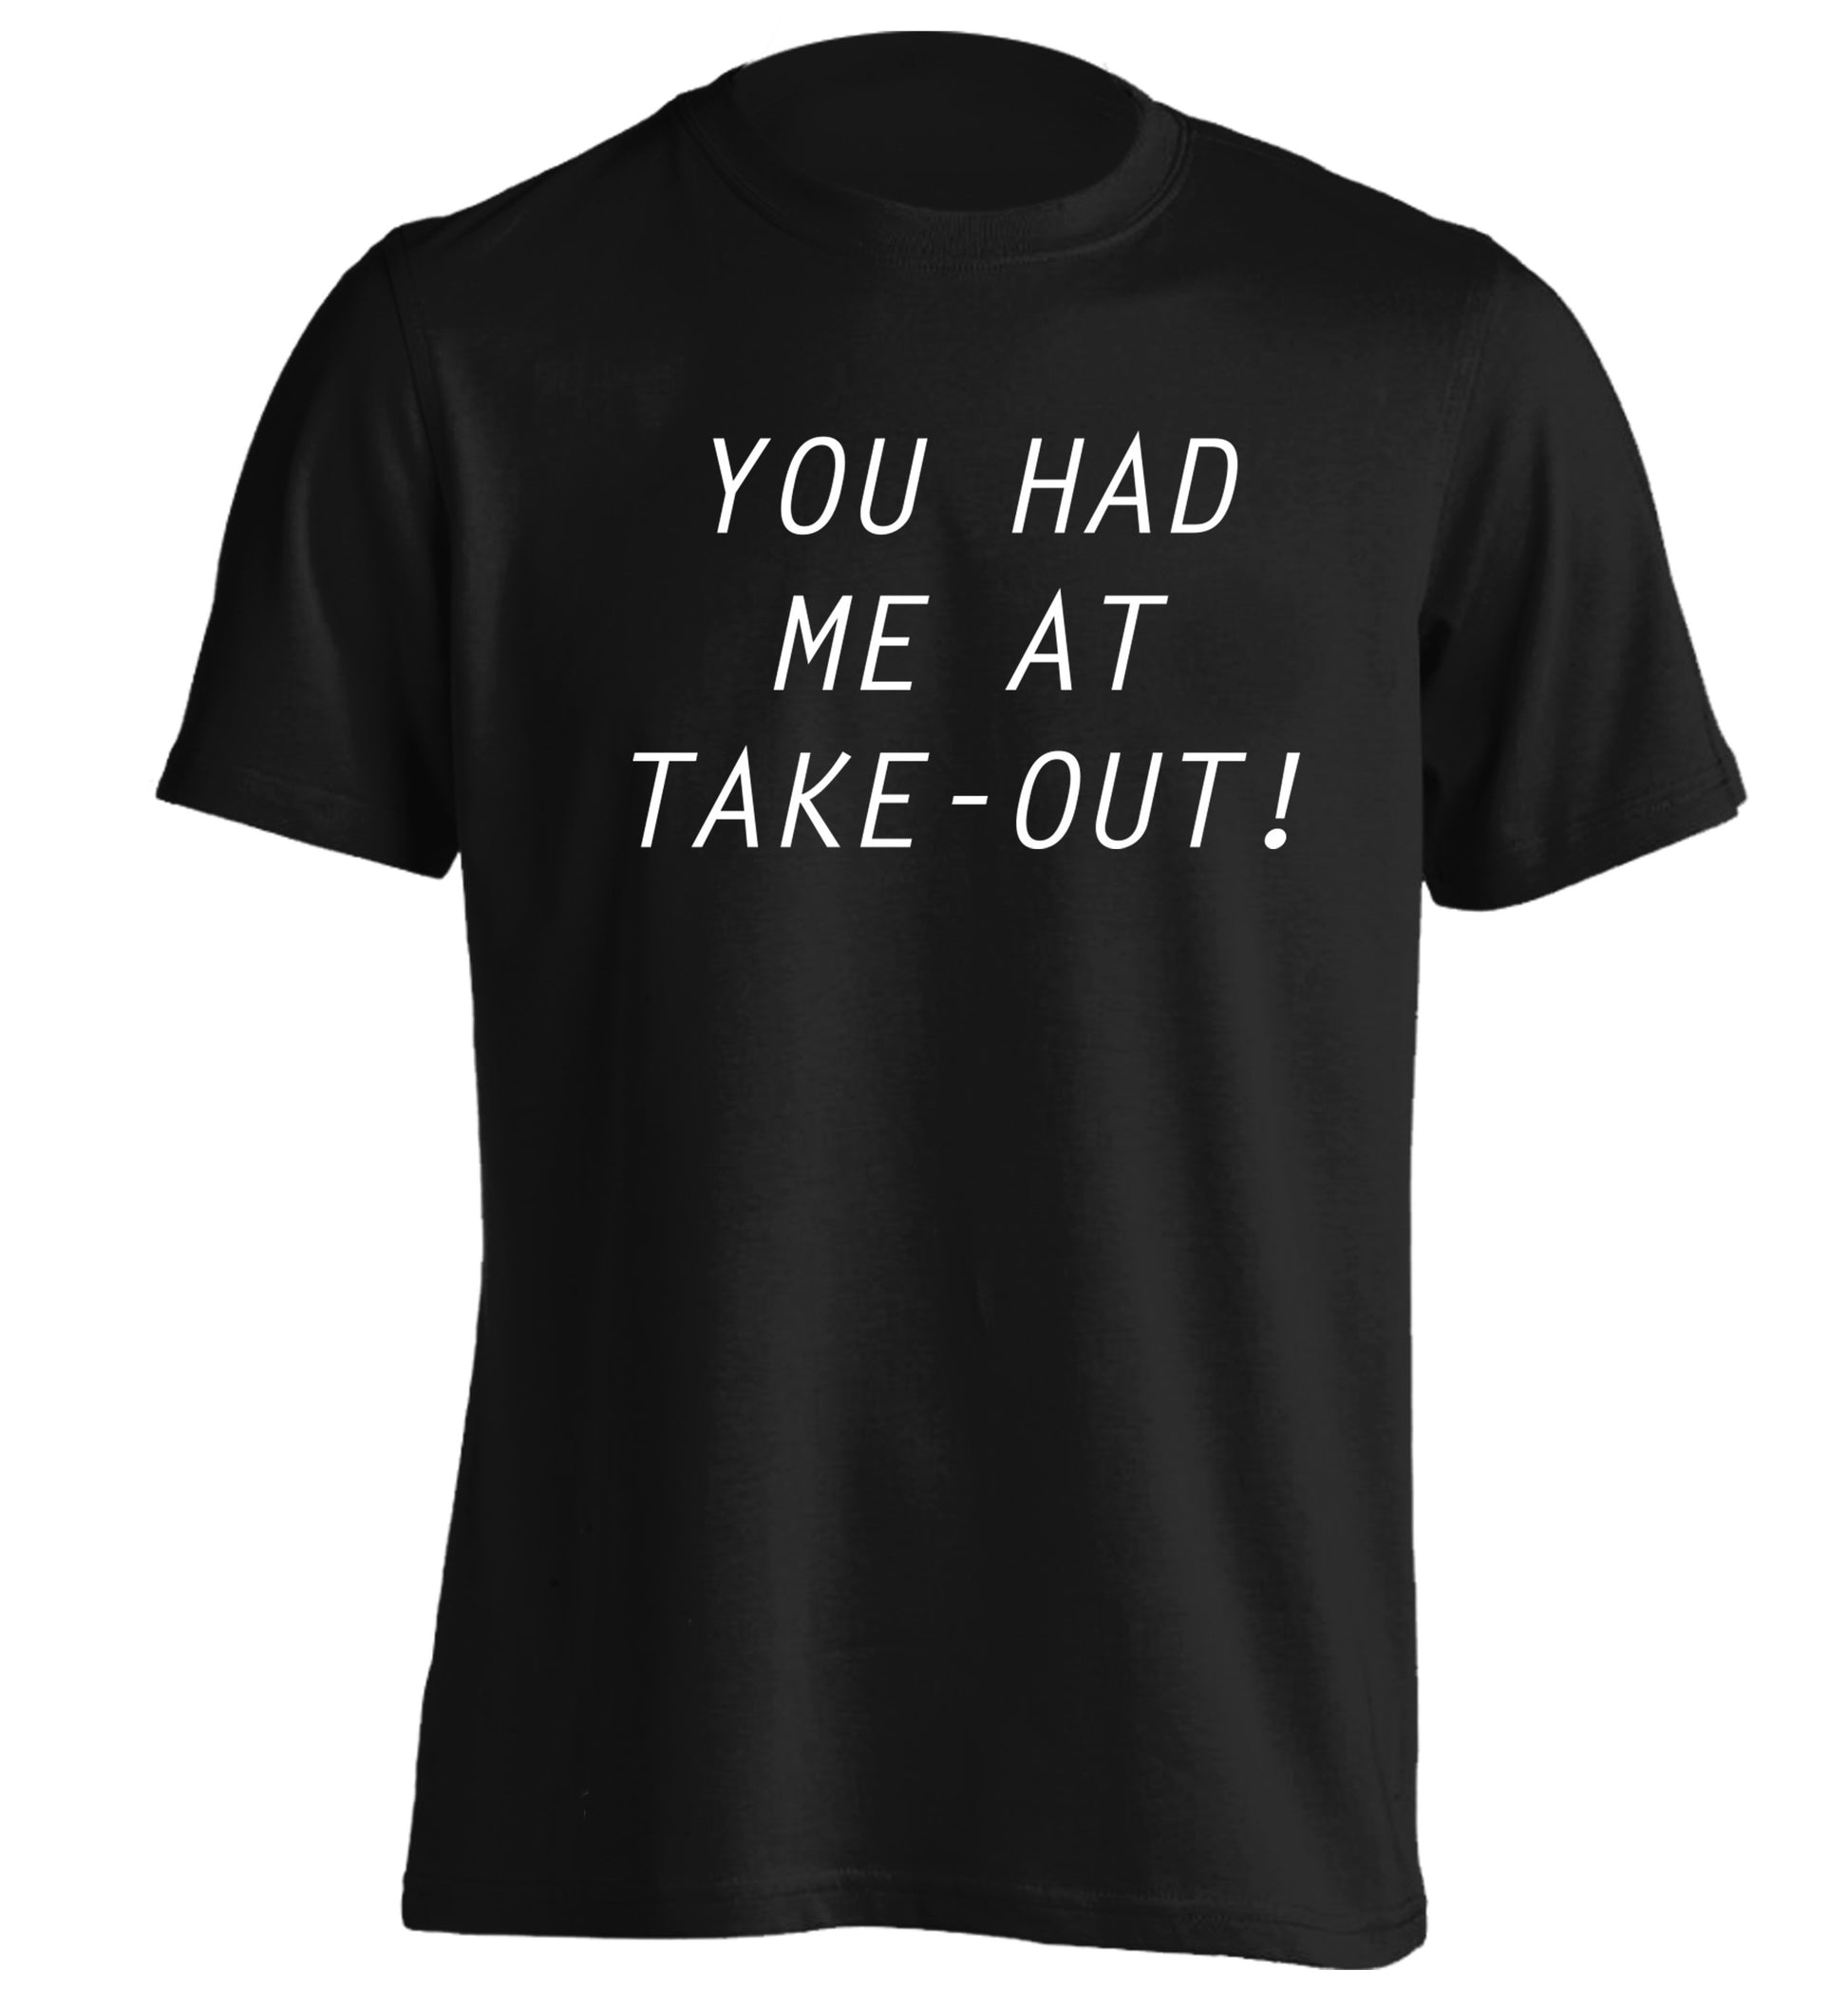 You had me at take-out adults unisex black Tshirt 2XL